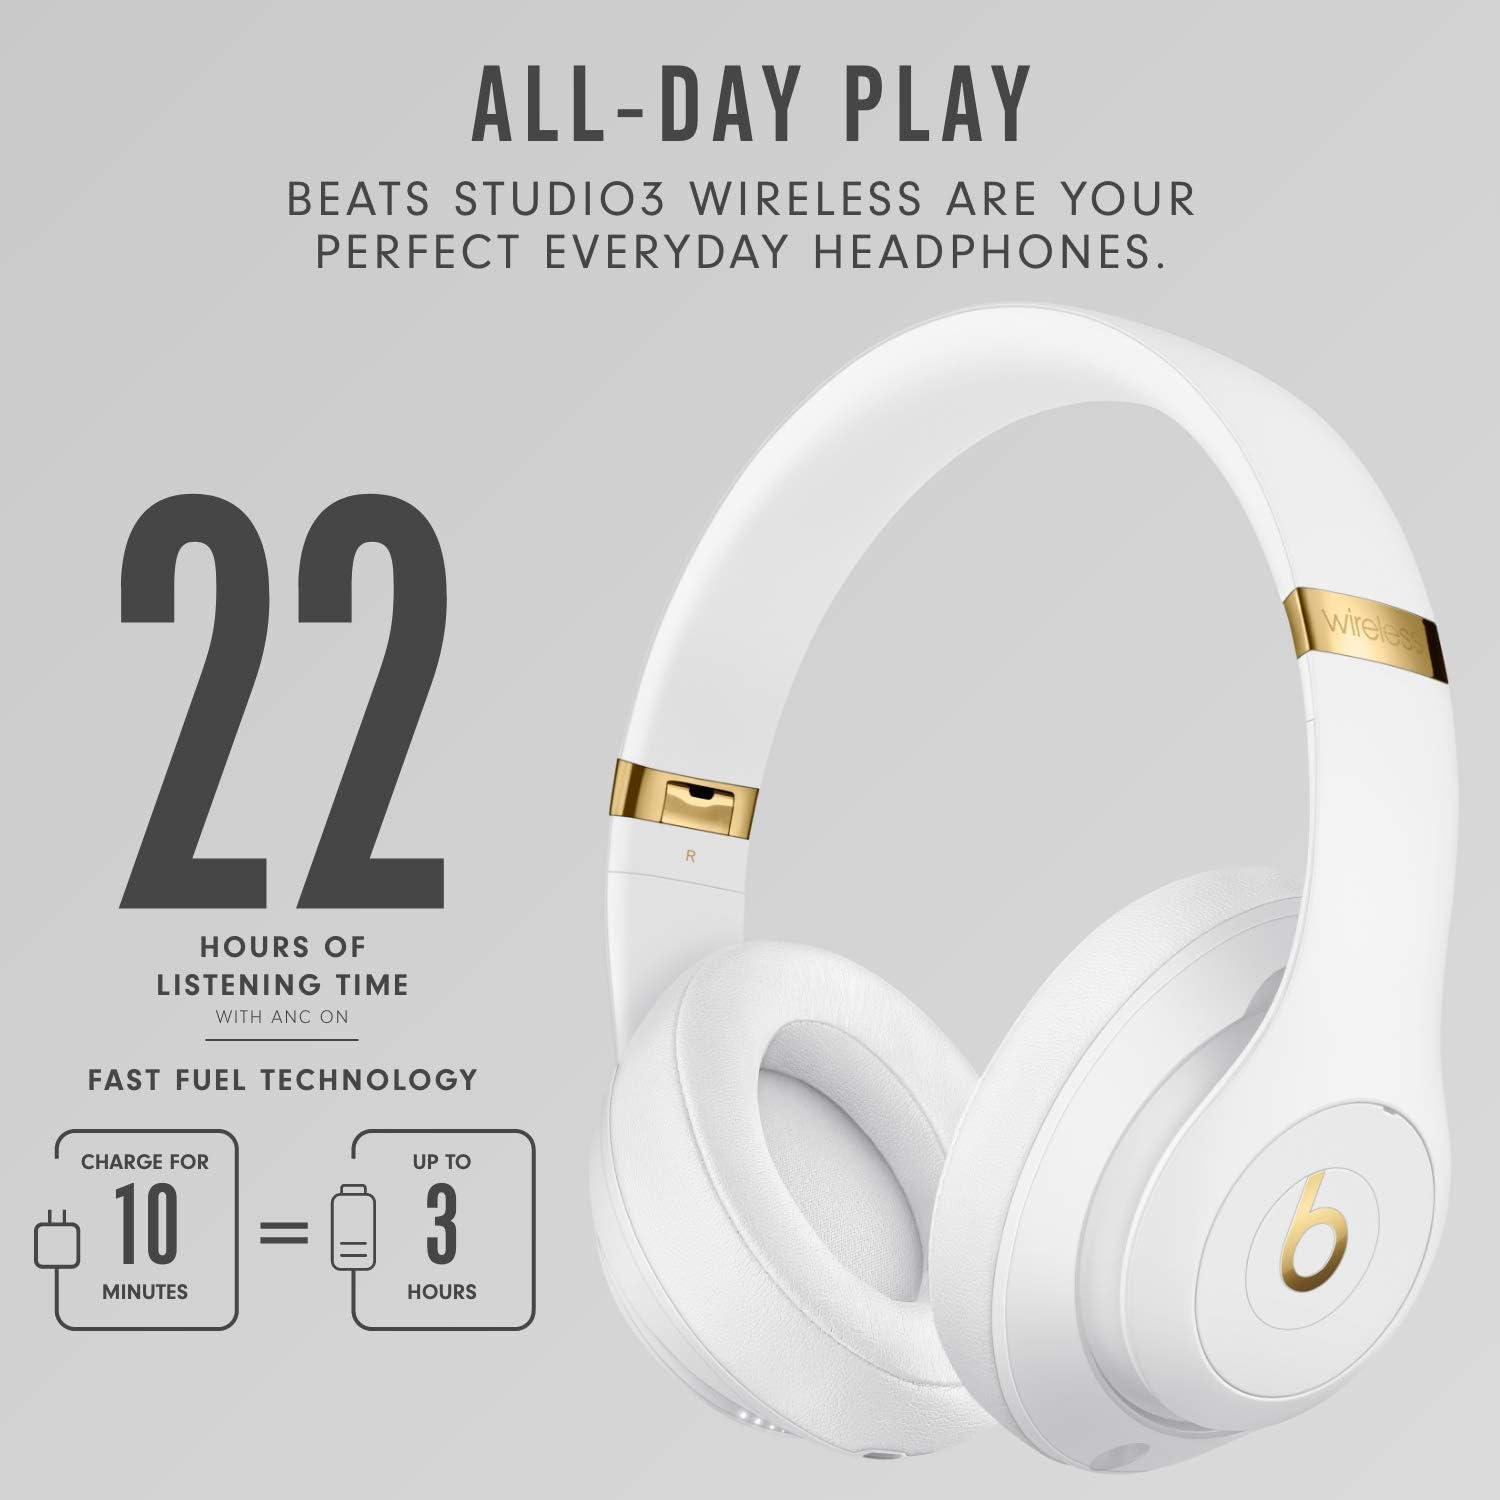 Beats Studio3 Wireless Noise Cancelling Over-Ear Headphones - Apple W1 Headphone Chip, Class 1 Bluetooth, Active Cancelling, 22 Hours Of Listening Time, Built-in Microphone White